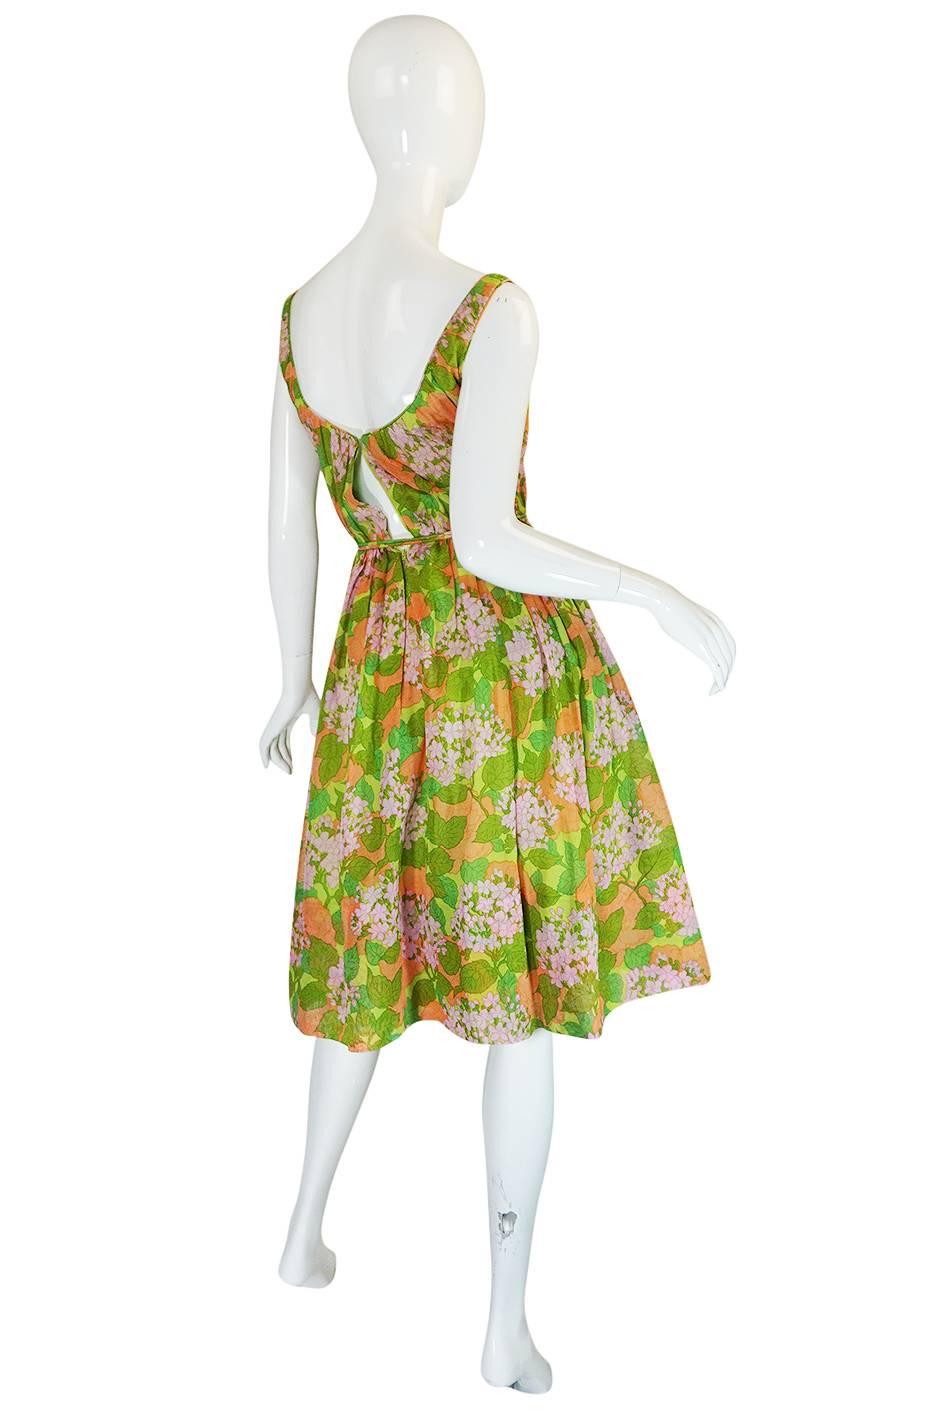 I have not found a Hannah Troy dress in ages and am so pleased to have such a fine example of her work in the shop. She designed clothes, which relied heavily on the designs coming out of the Italian couturiers, from the late 30s to the early 60s.